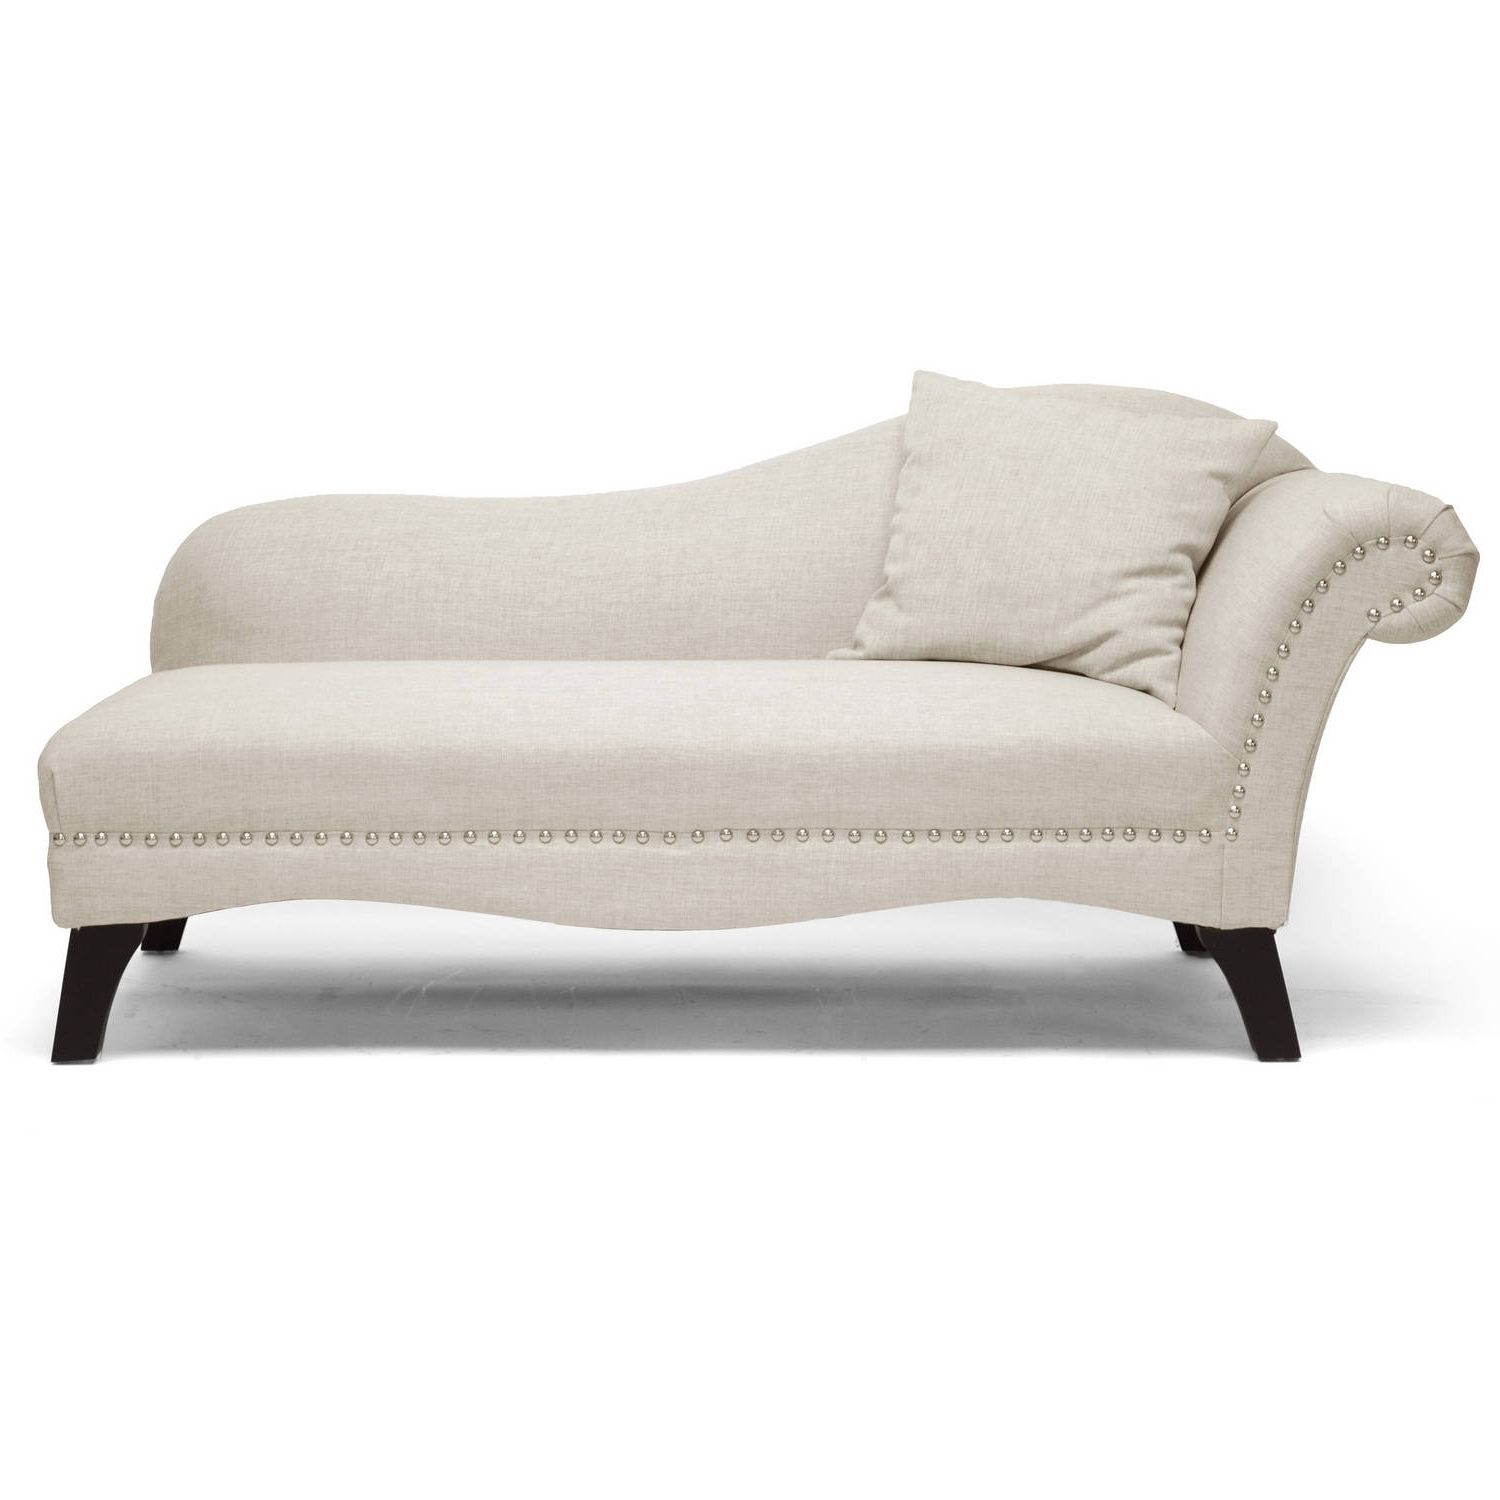 Most Recently Released Indoor Chaise Lounge Chairs Pertaining To Chaise Lounges – Walmart (View 15 of 15)